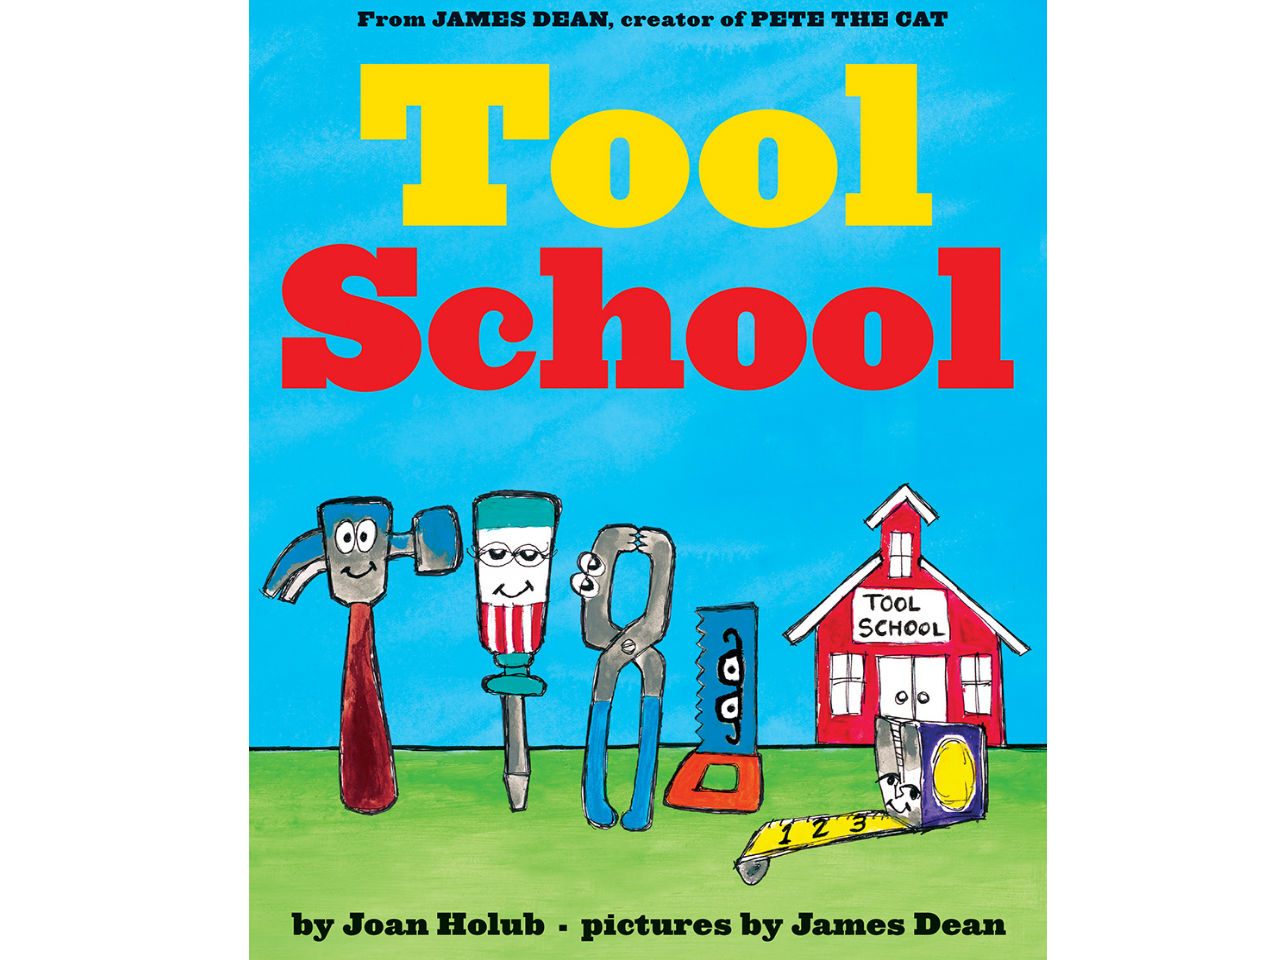 book cover about animated tools going to school